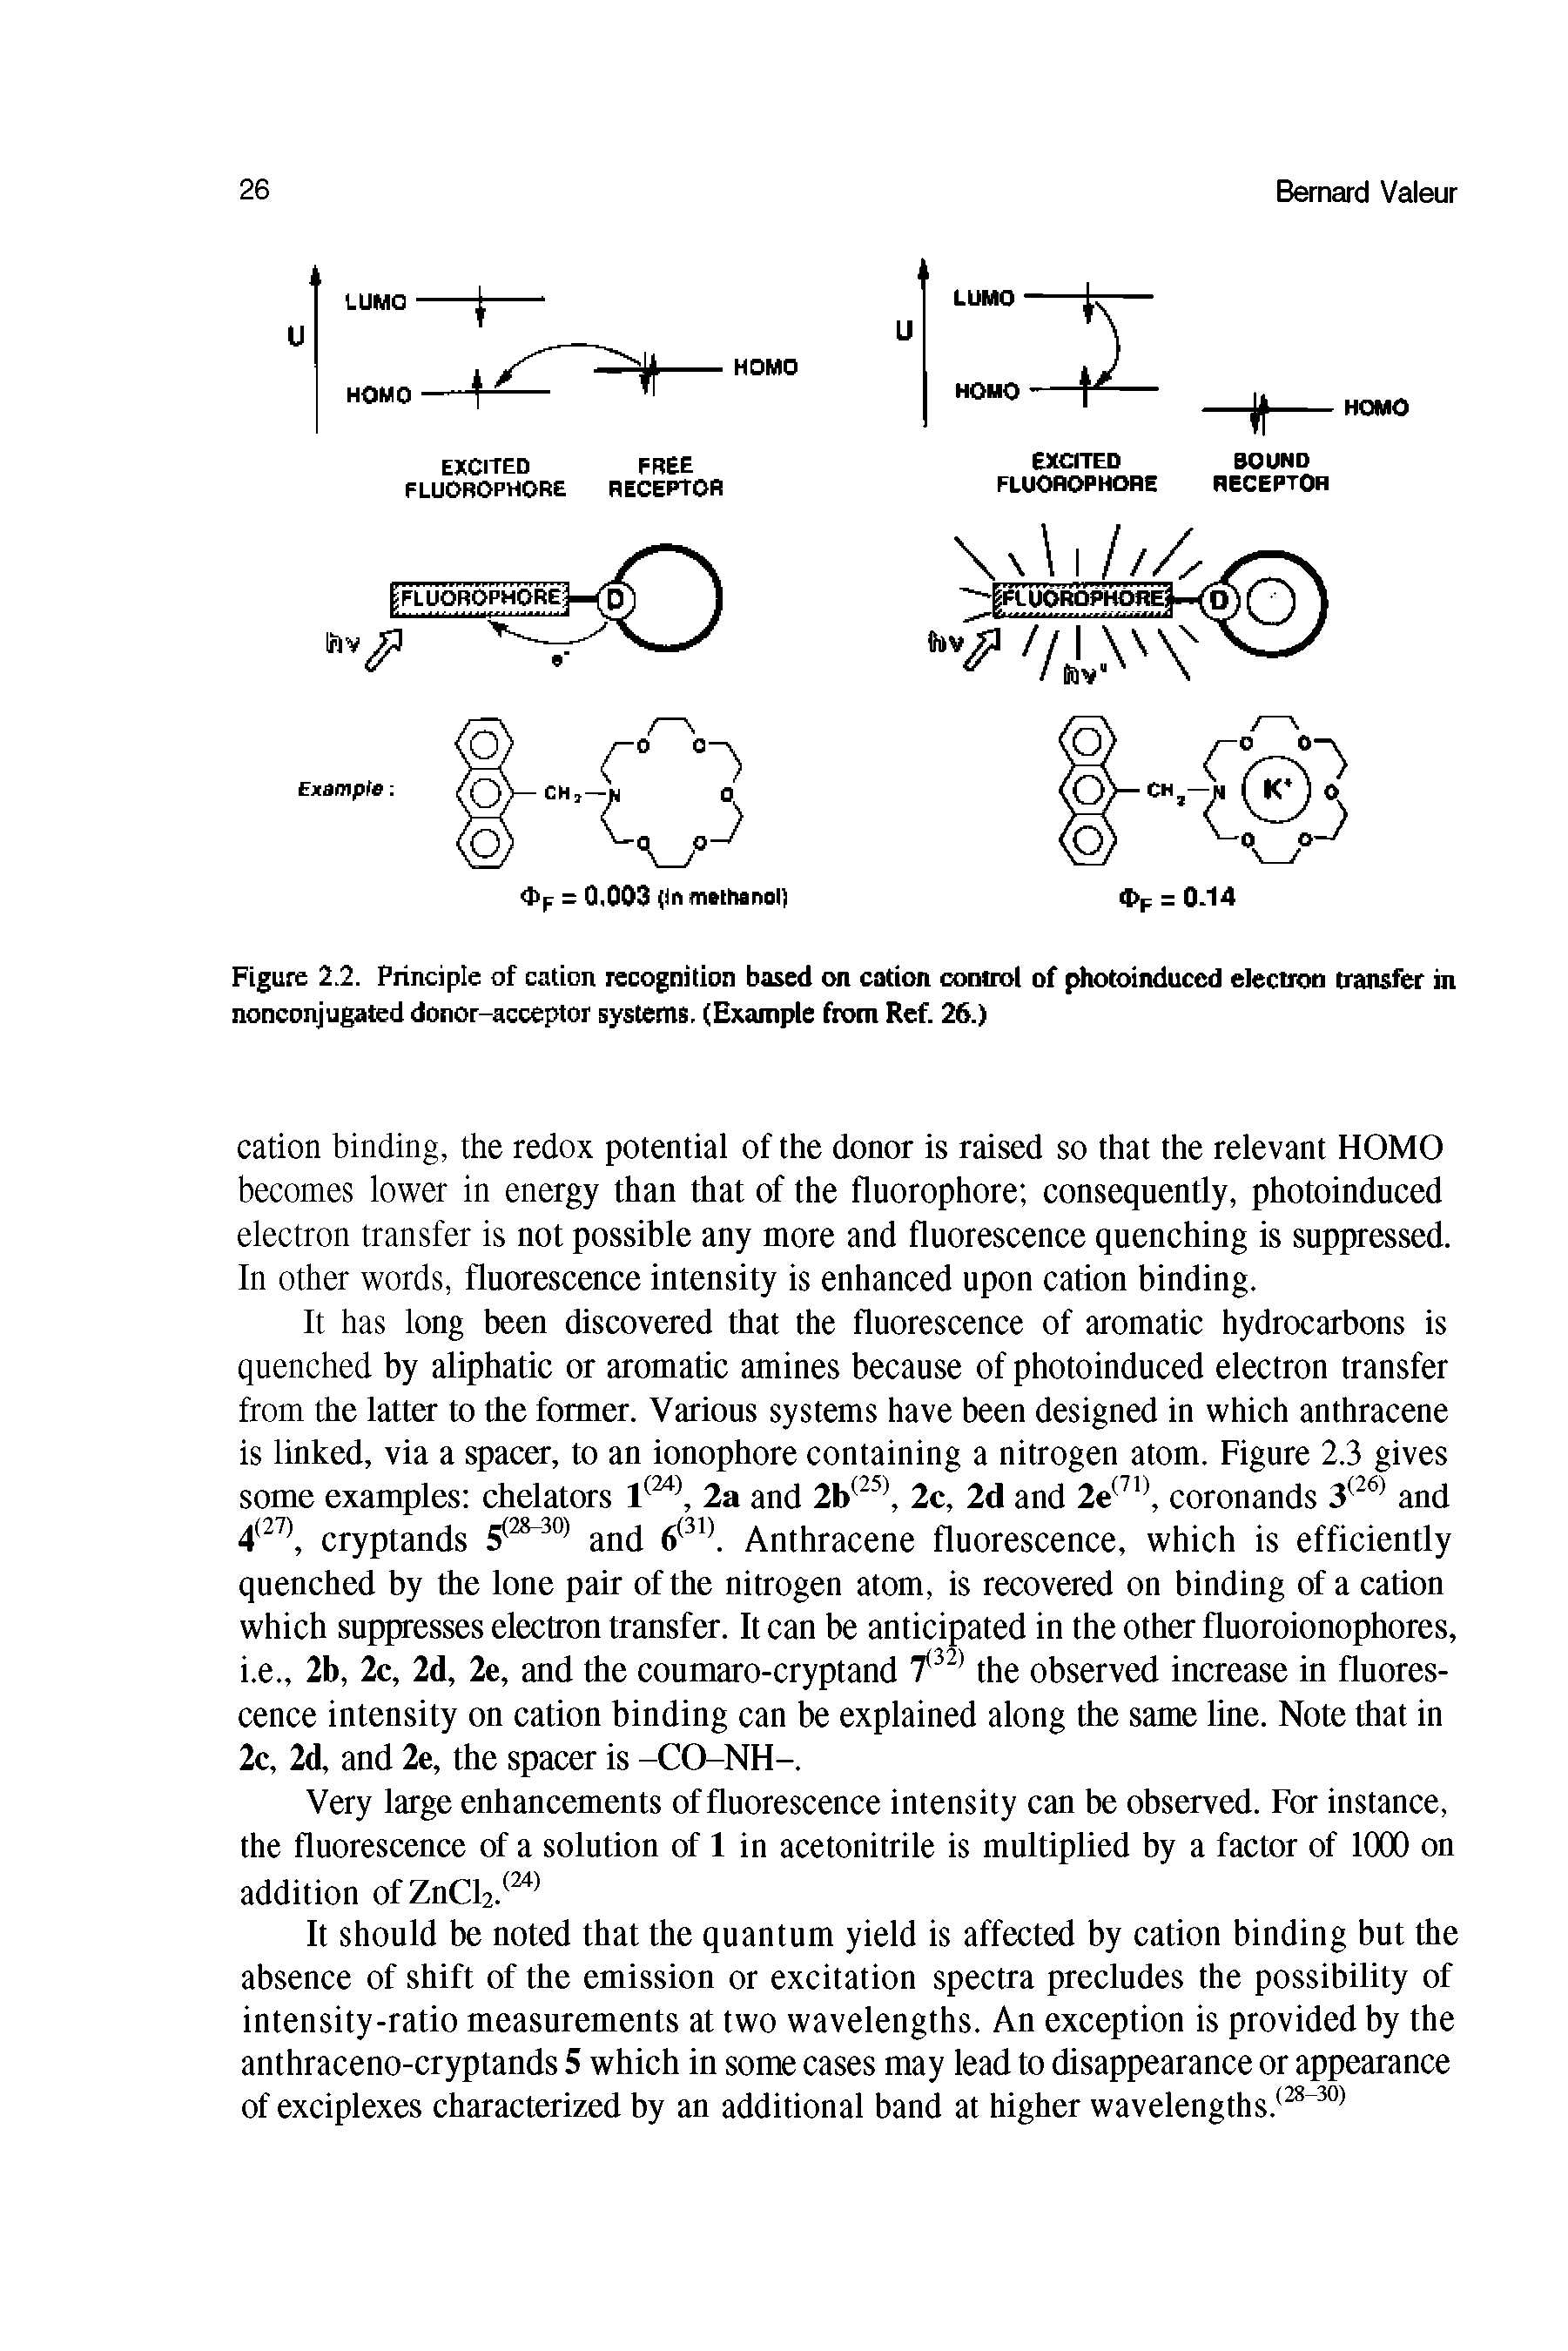 Figure 2.2. Principle of cation recognition based on cation control of photoinduced electron transfer in nonconjugated donor-acceptor systems. (Example from Ref. 26.)...